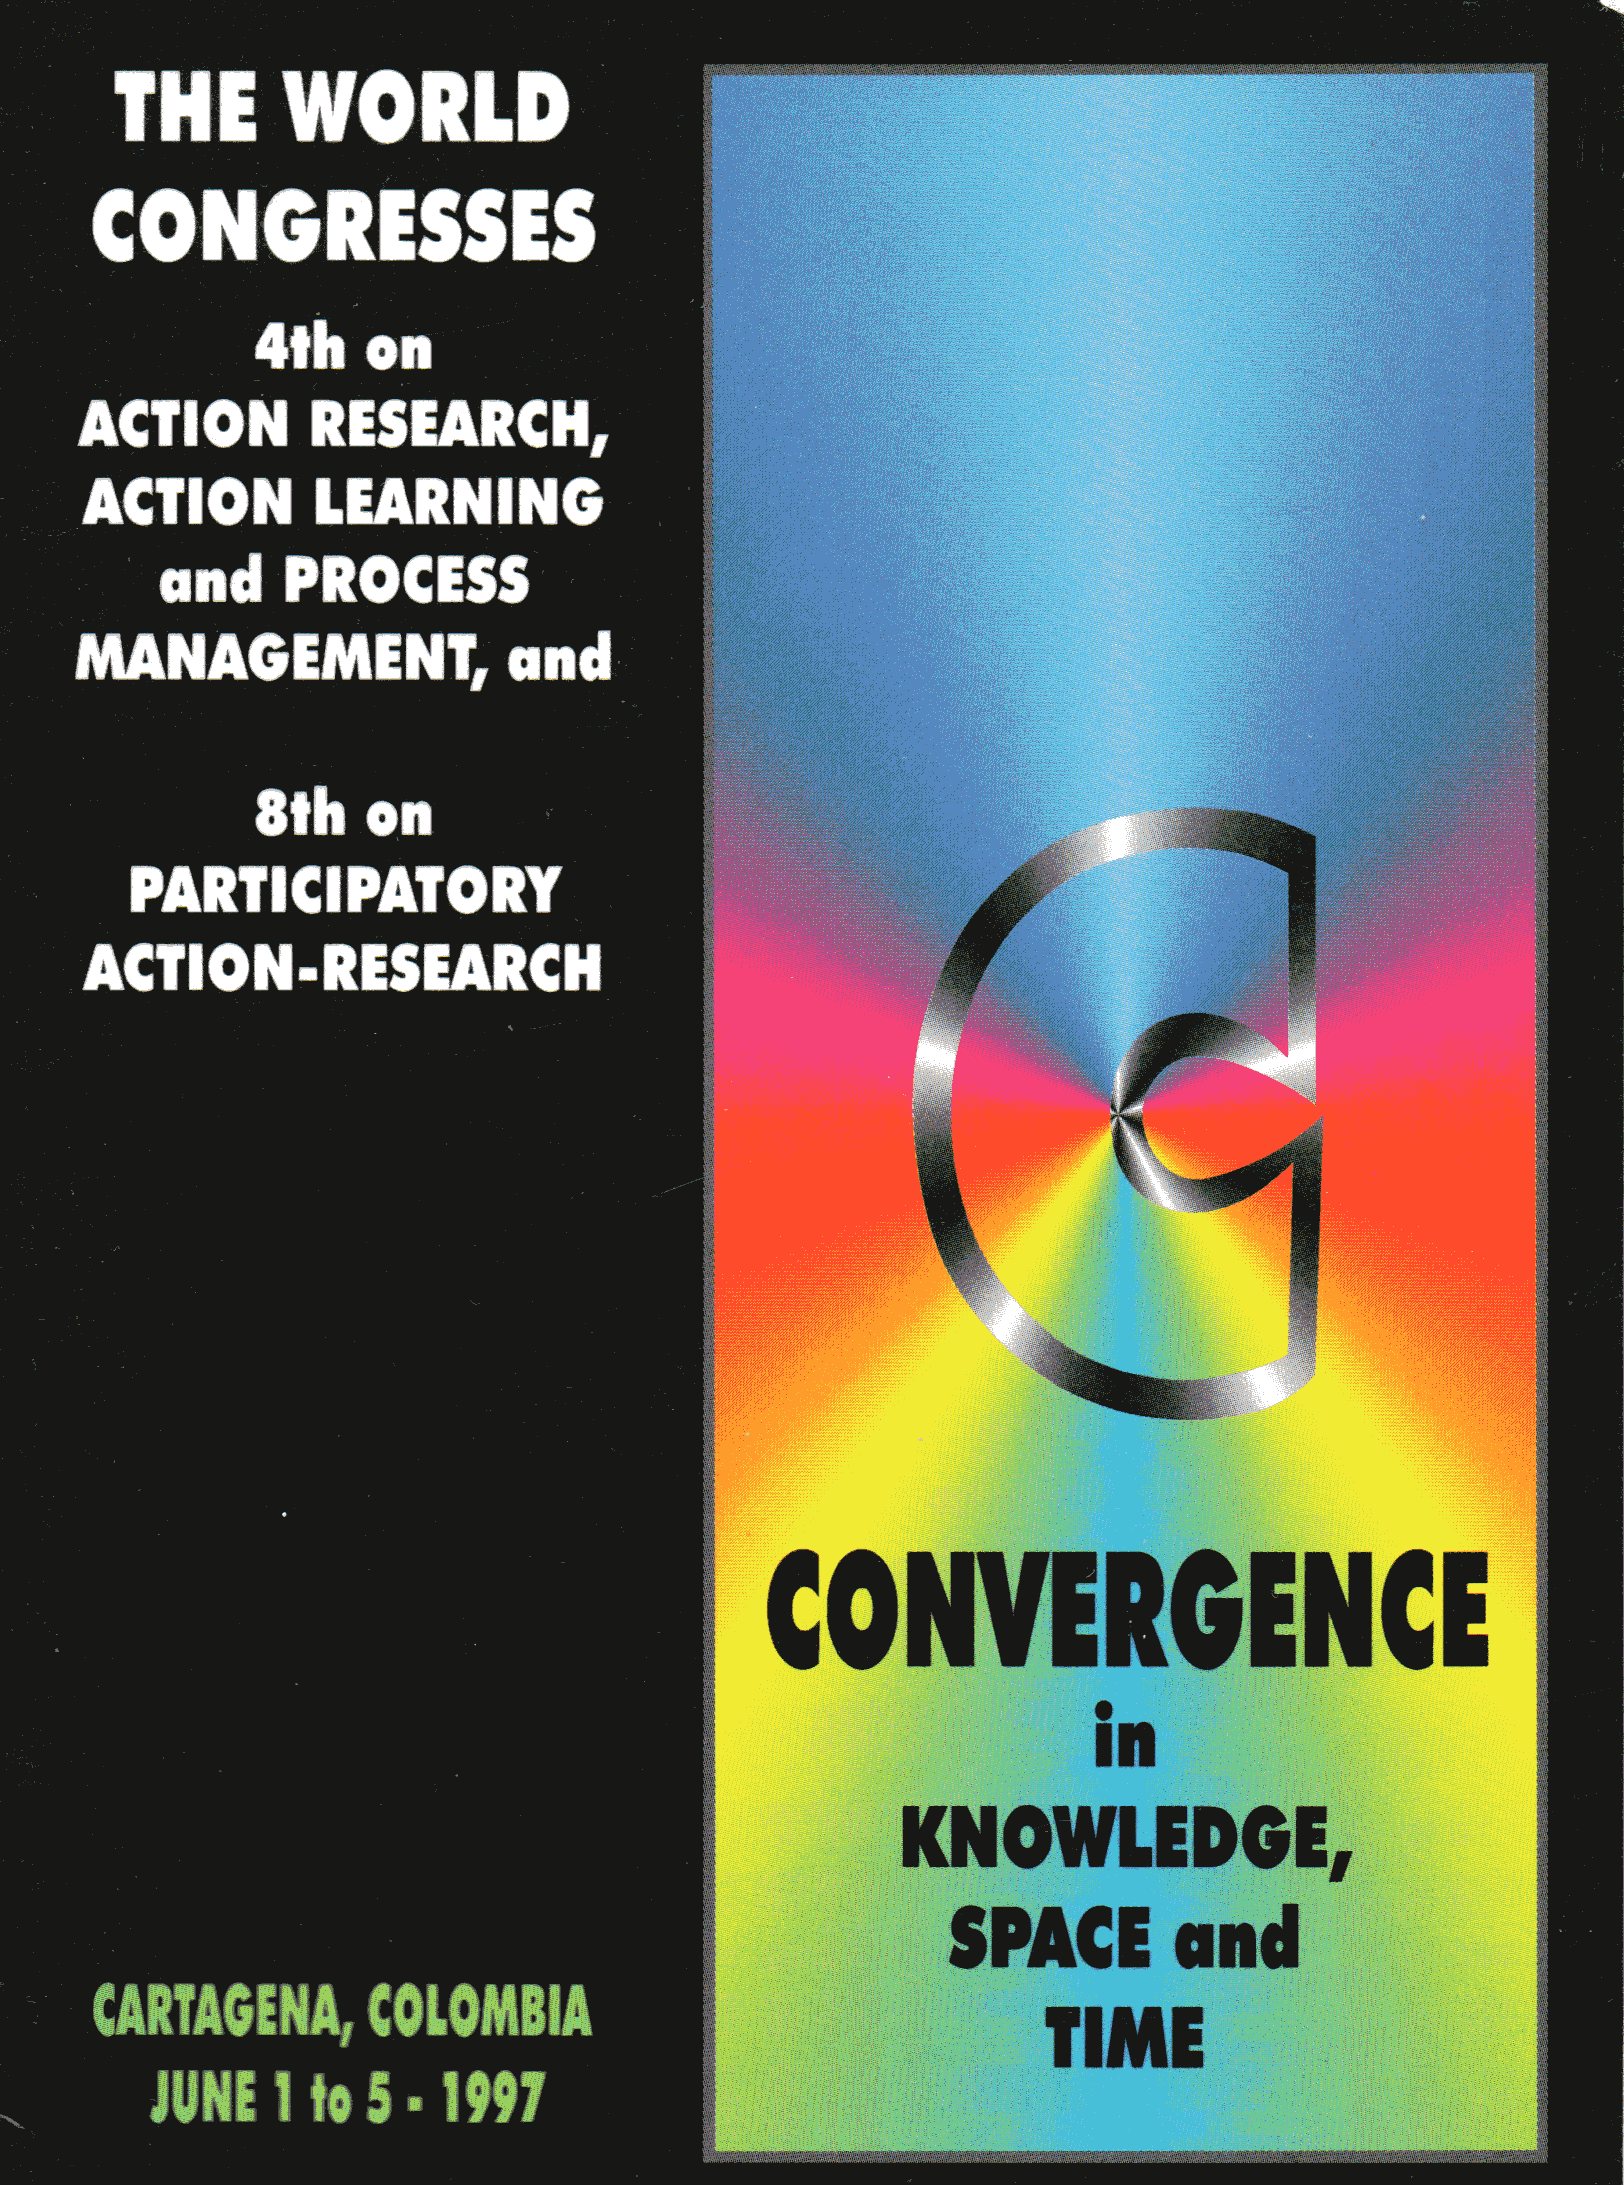 From convergence to congruence